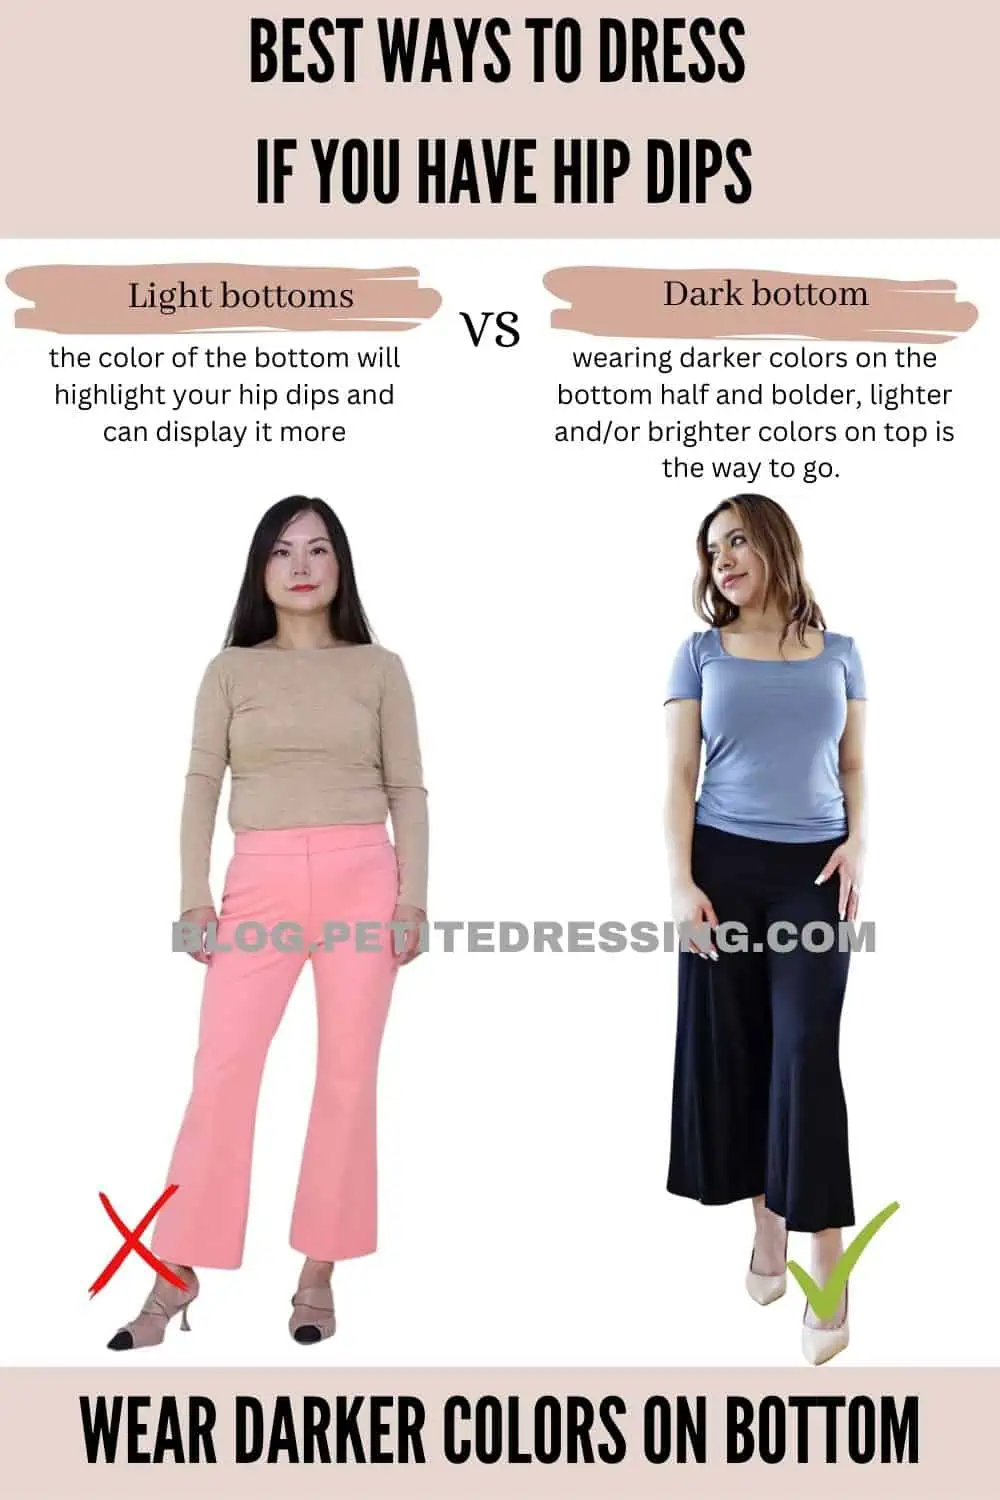 What to Wear to Hide Hip Dips?